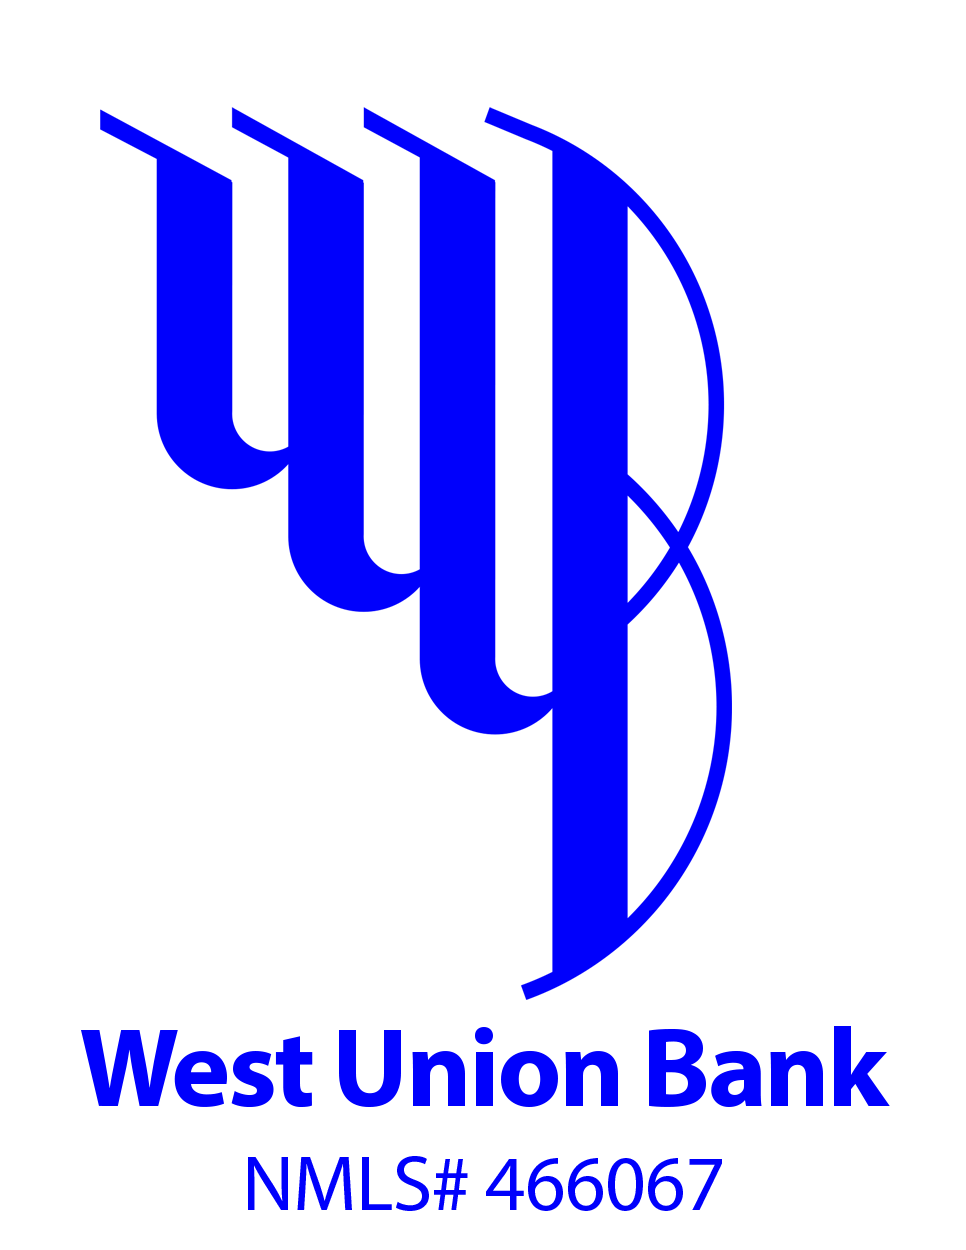 Union Bank reduces MCLR by 20 bps across tenors